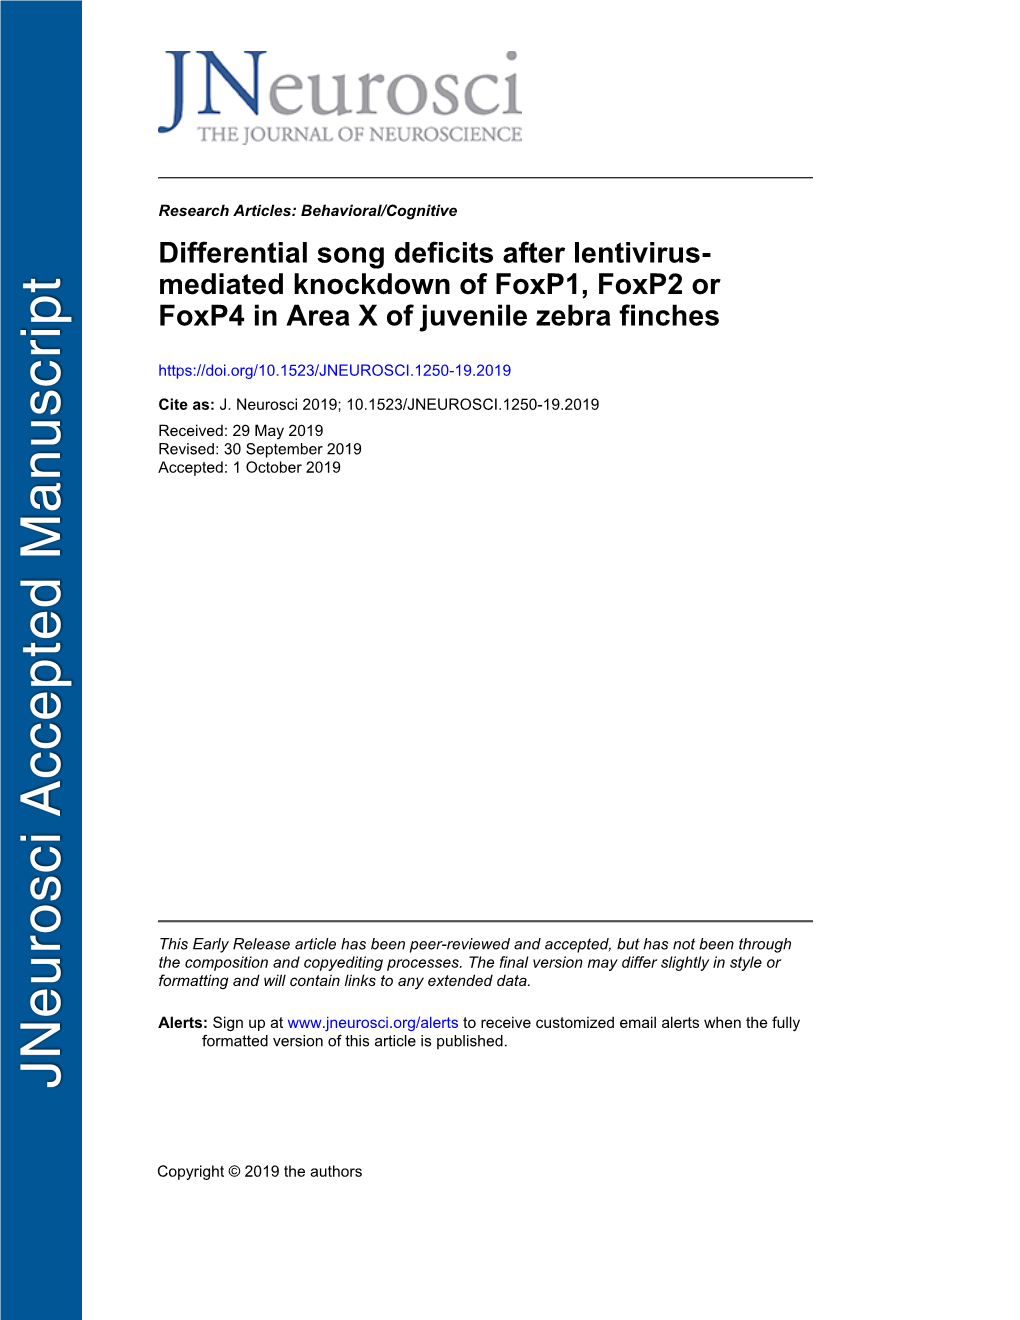 Differential Song Deficits After Lentivirus-Mediated Knockdown of Foxp1, Foxp2 Or Foxp4 in Area X of Juvenile Zebra Finches